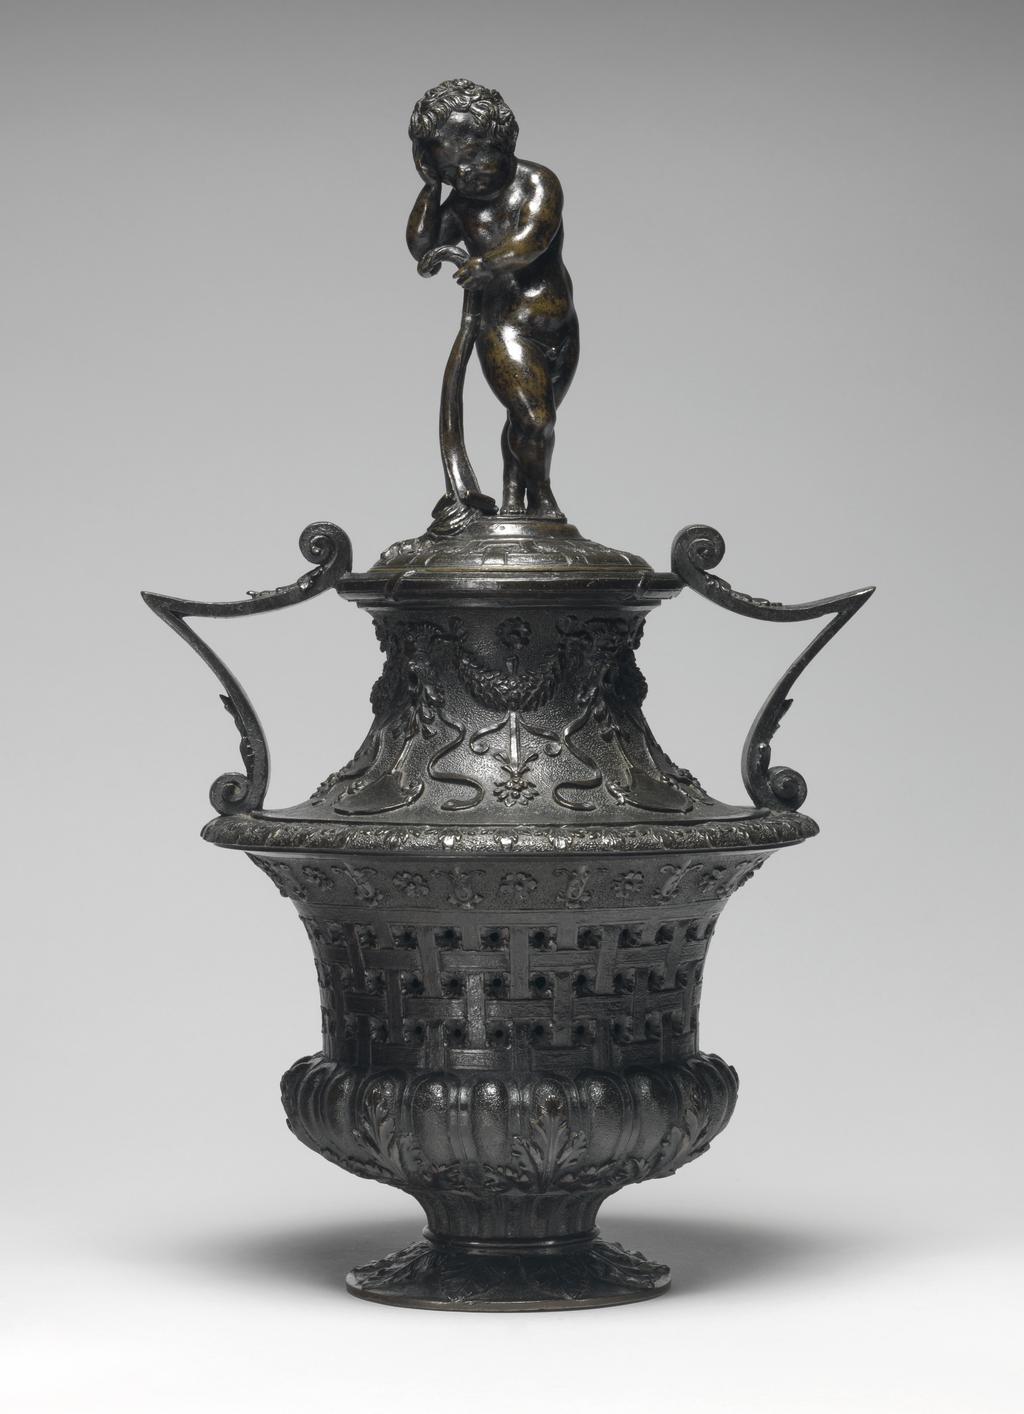 An image of Cassolette and cover with a funerary genius. Vincenzio Grandi (Italian sculptor, 1493-1577/78), and/or Gian Girolama Grandi (Italian, 1508-1560). Vase-shaped, with pierced sides, and two v-shaped handles, the cover surmounted by a standing putto leaning on an extinguished torch. Copper alloy, probably bronze, cast, height, whole, 34.1, cm, 1530-1560. Renaissance.